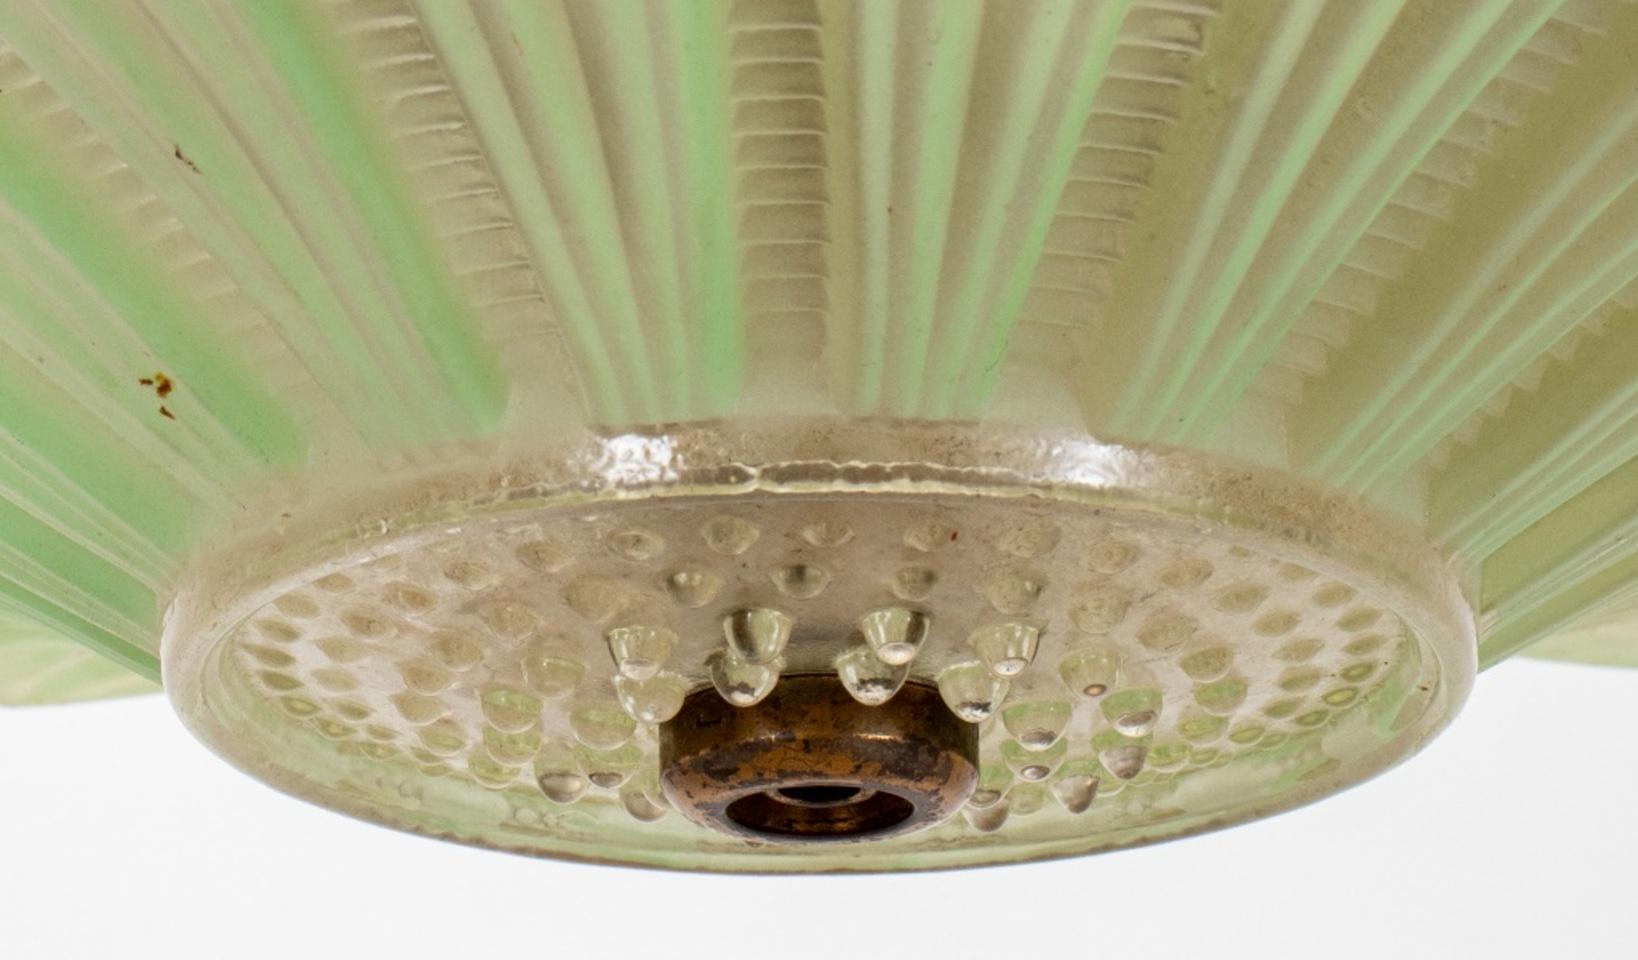 American Art Deco period molded glass pendant light, with pressed glass fountain plume and basin detail above a reeded column, supporting a five light pendant with pressed frosted glass shade with abstracted floral detail.

Dimensions: 14